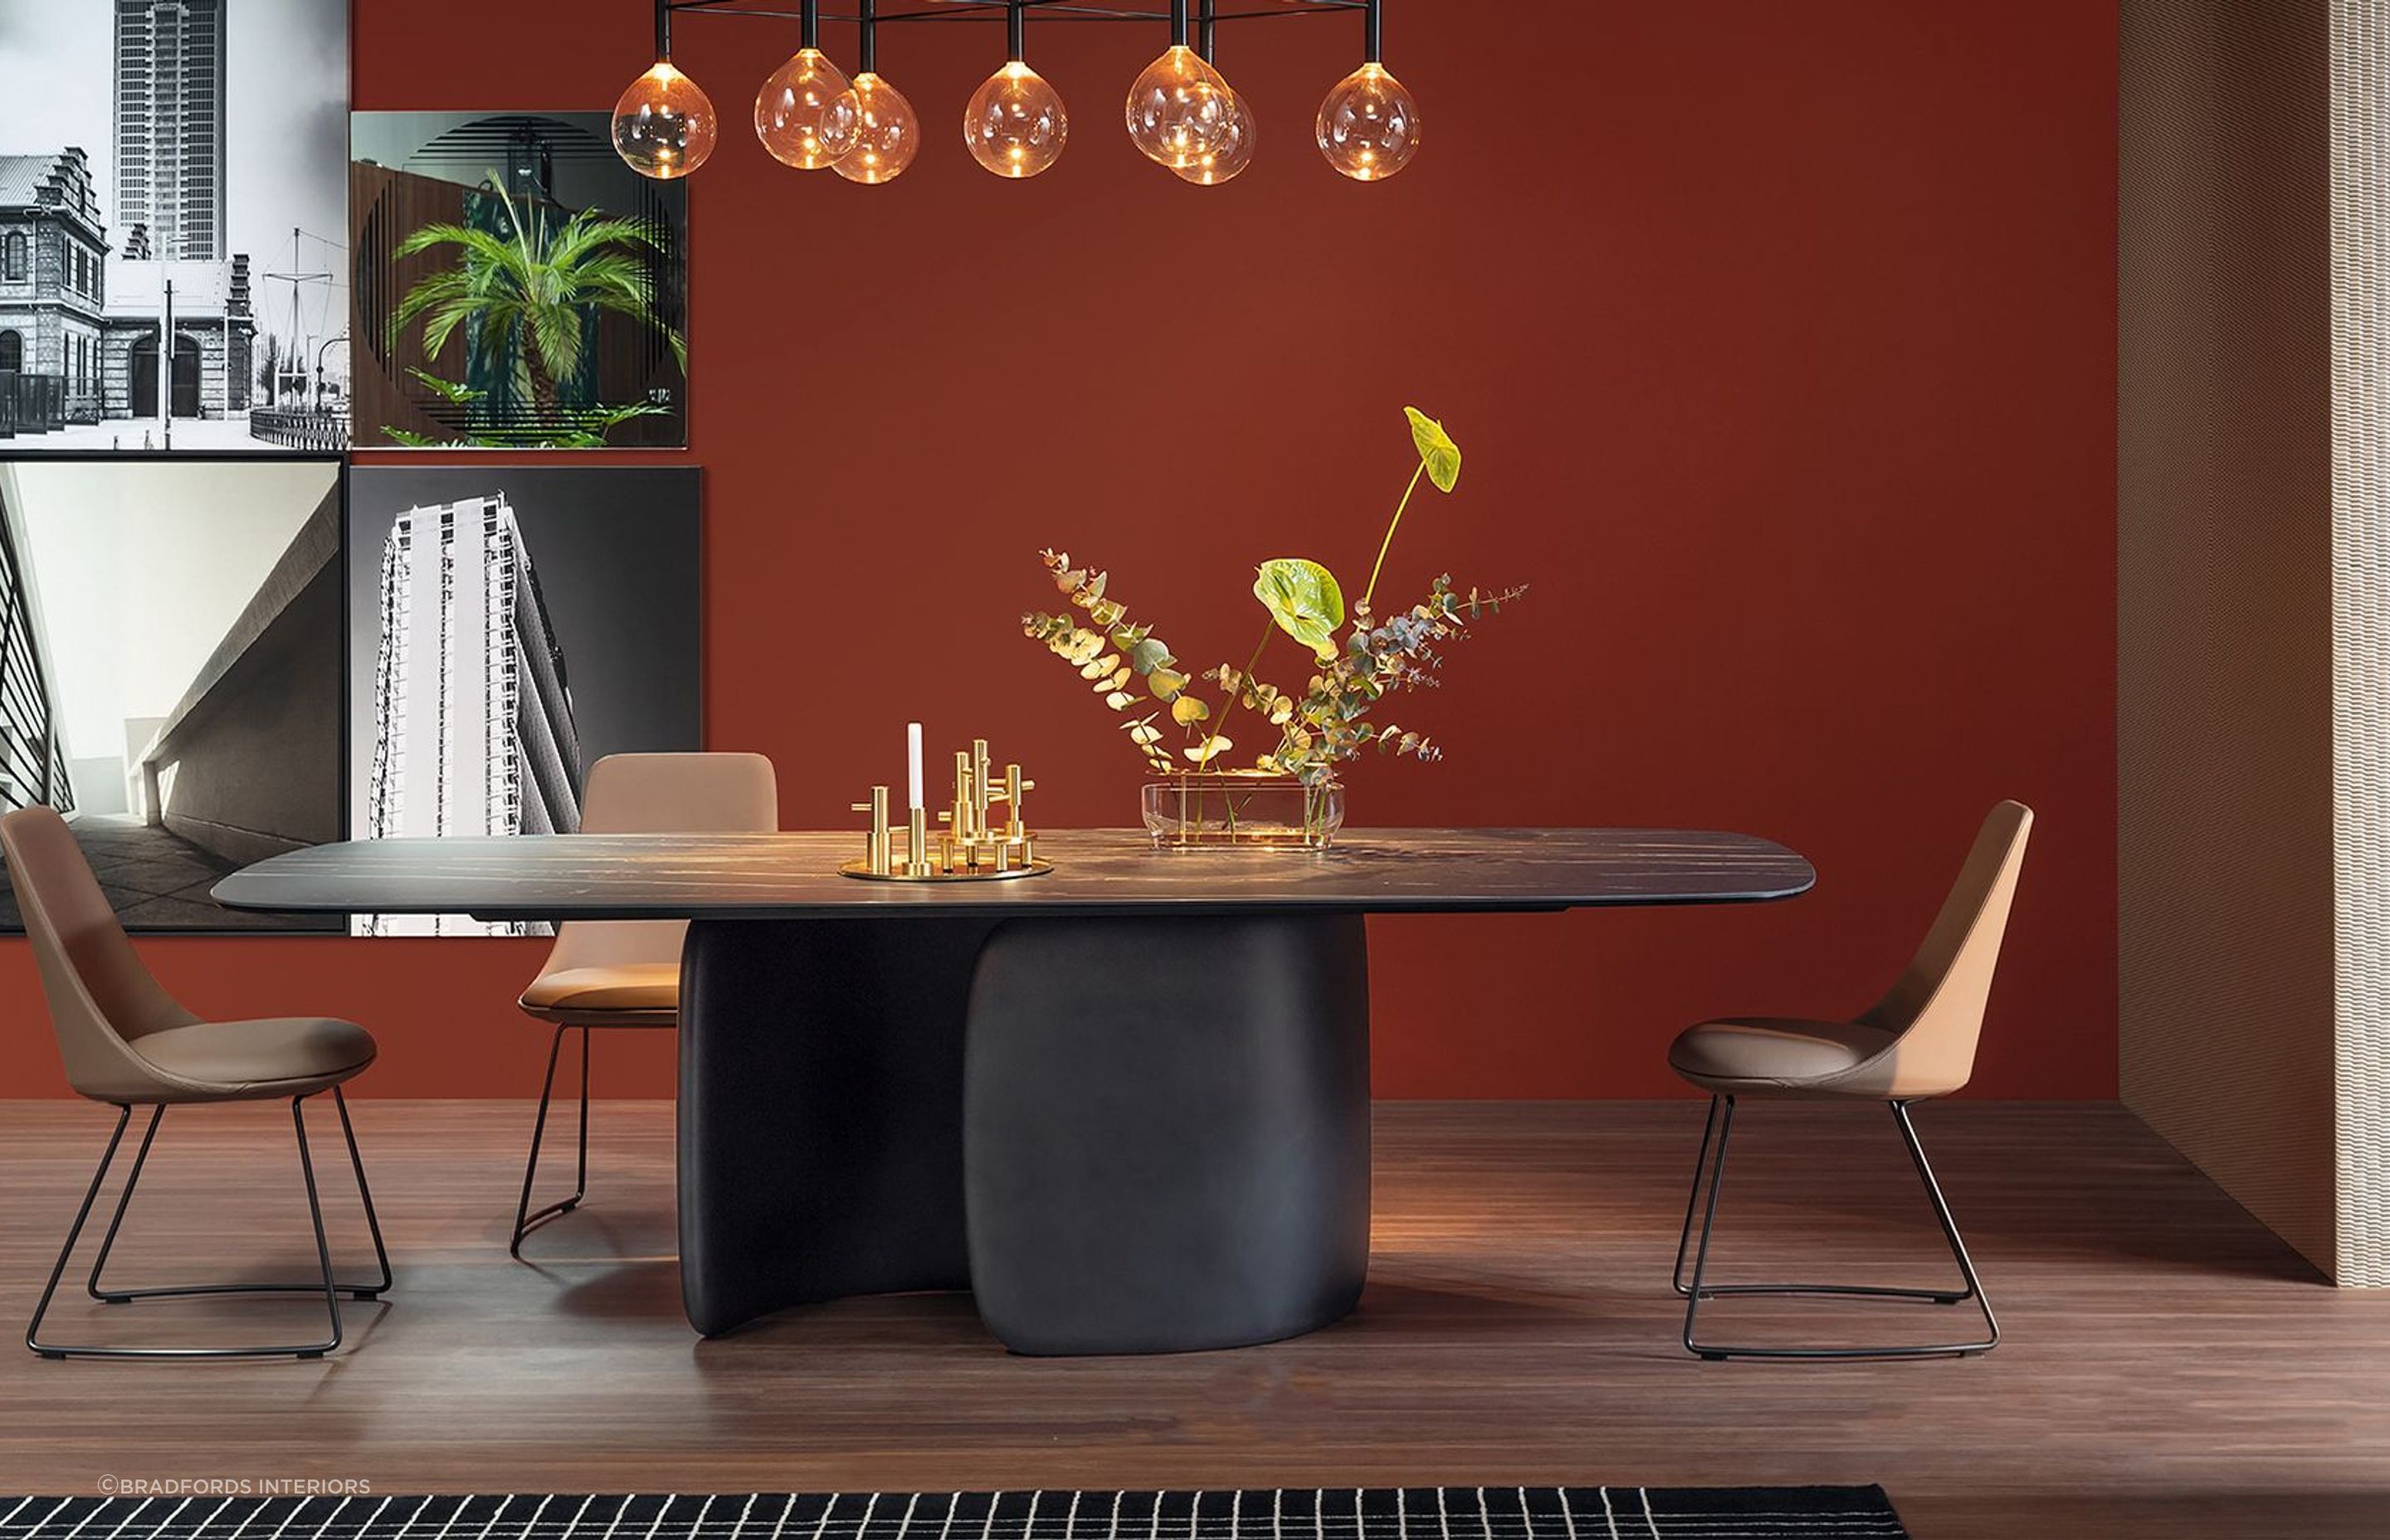 Customisable Italian Dining Tables are great example of designer versatility